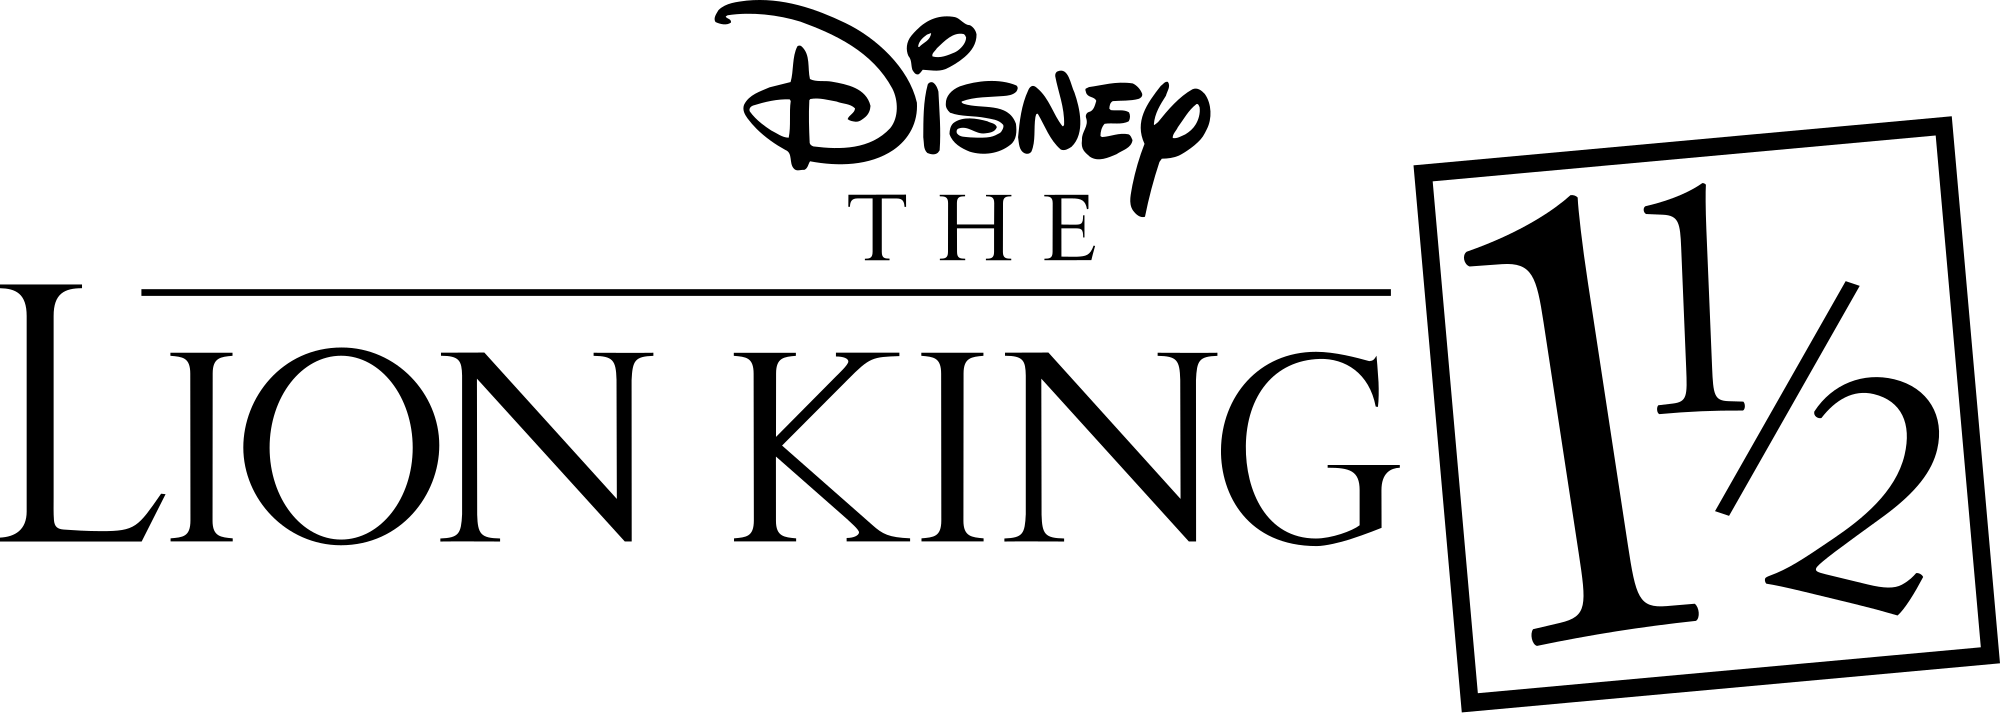 The Lion King Logo - File:The Lion King 1½ logo.svg - Wikimedia Commons